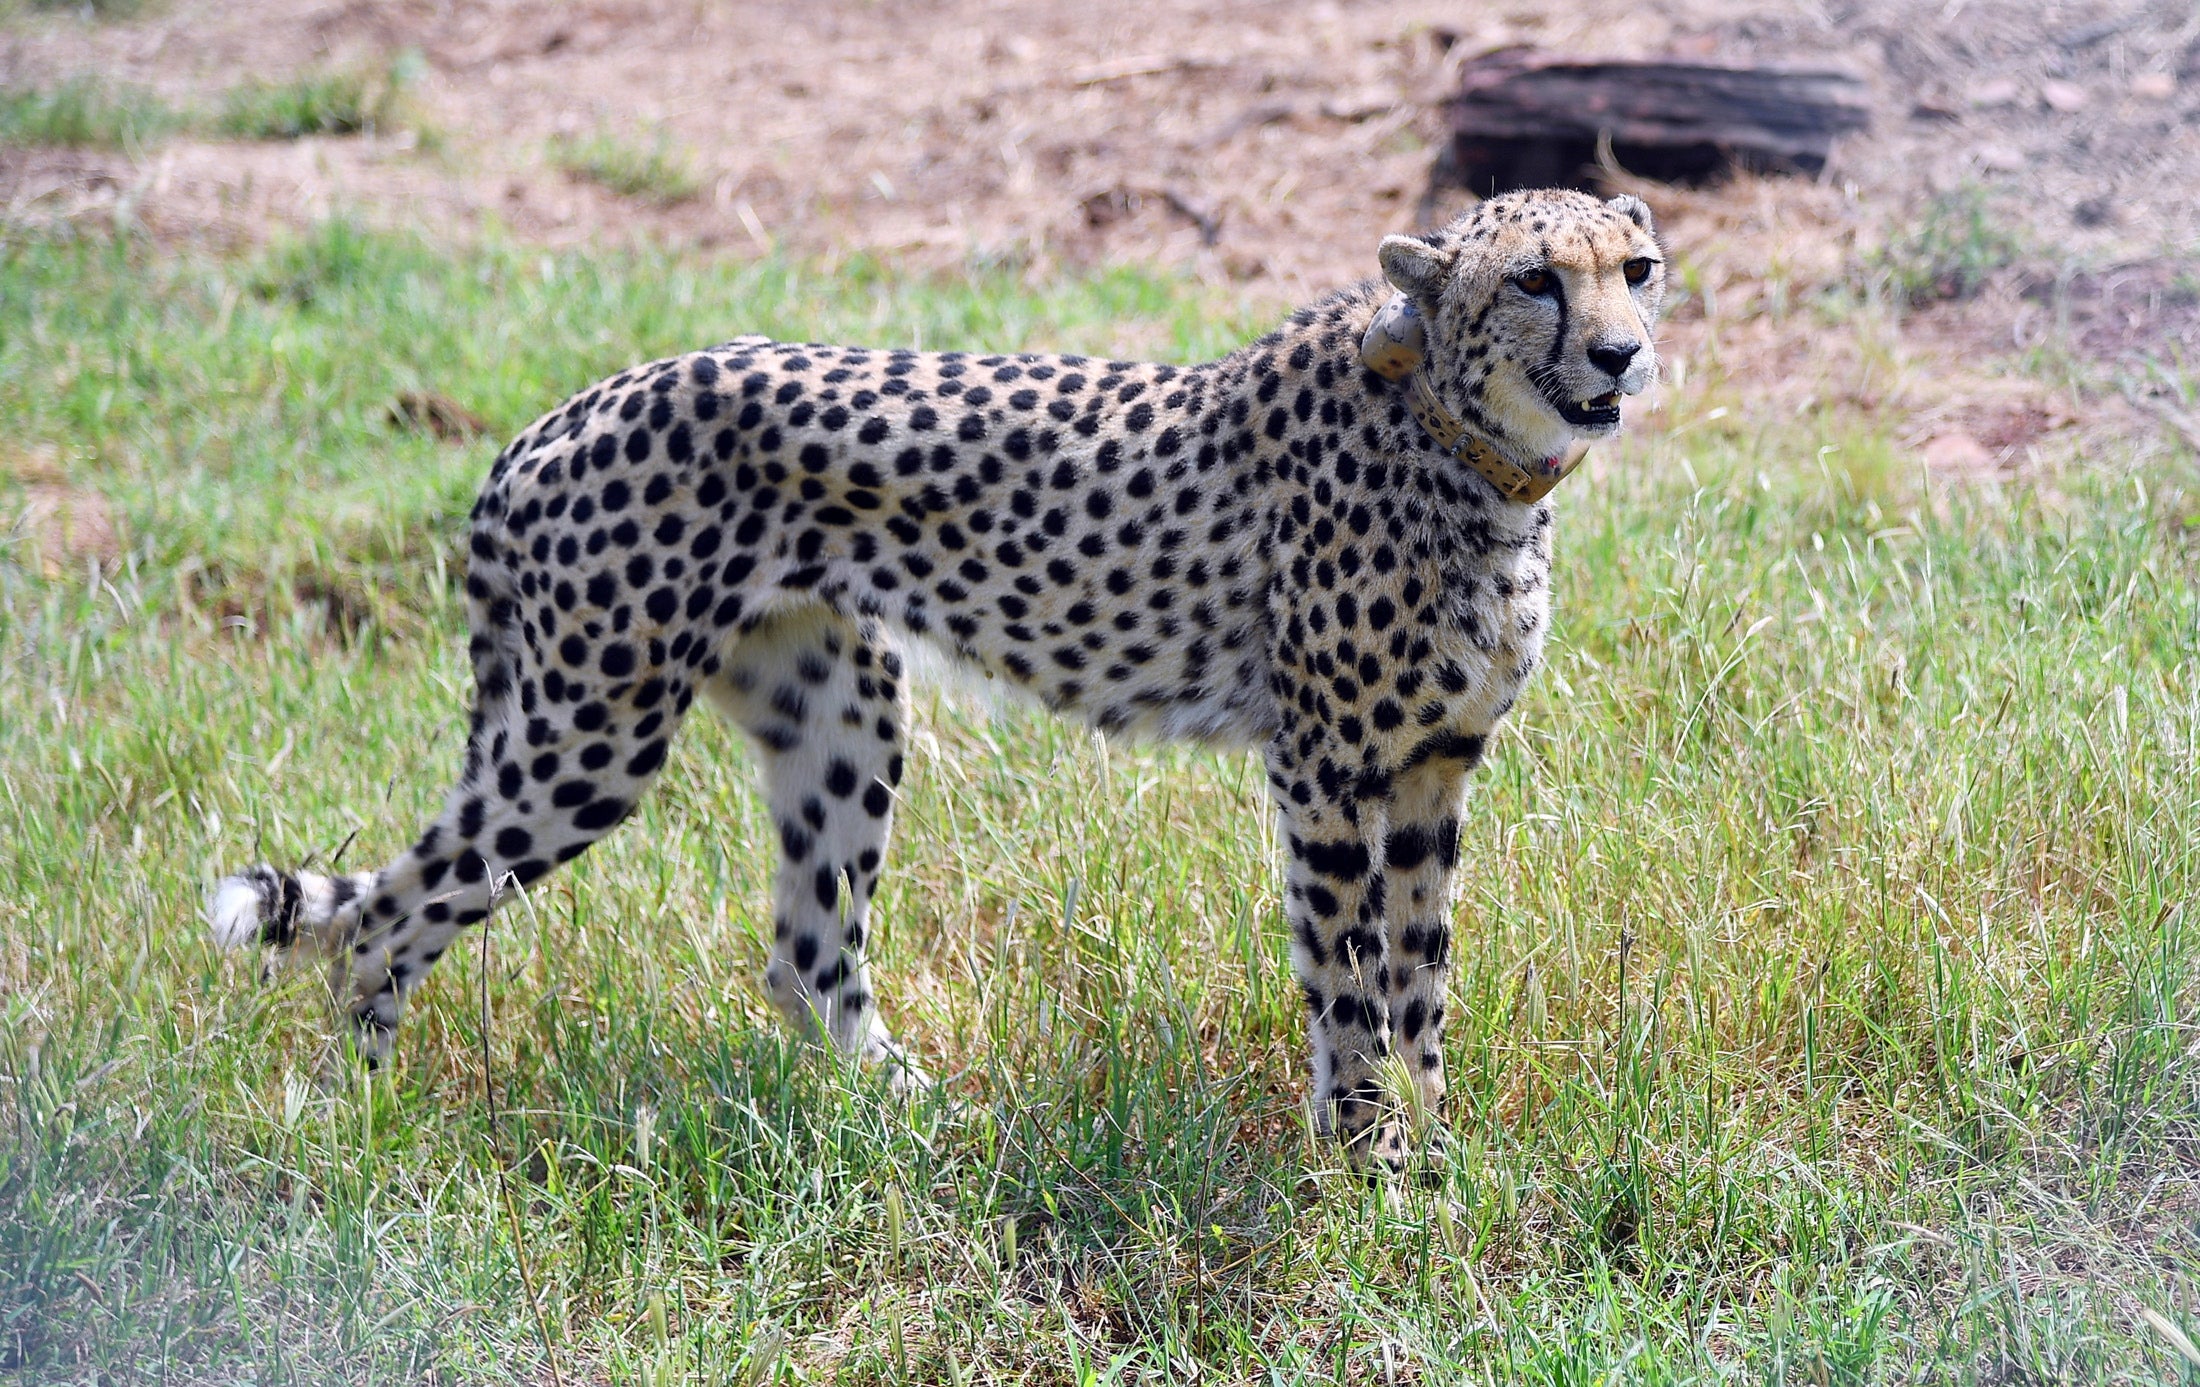 One of the African cheetahs brought to India seen in Kuno national park